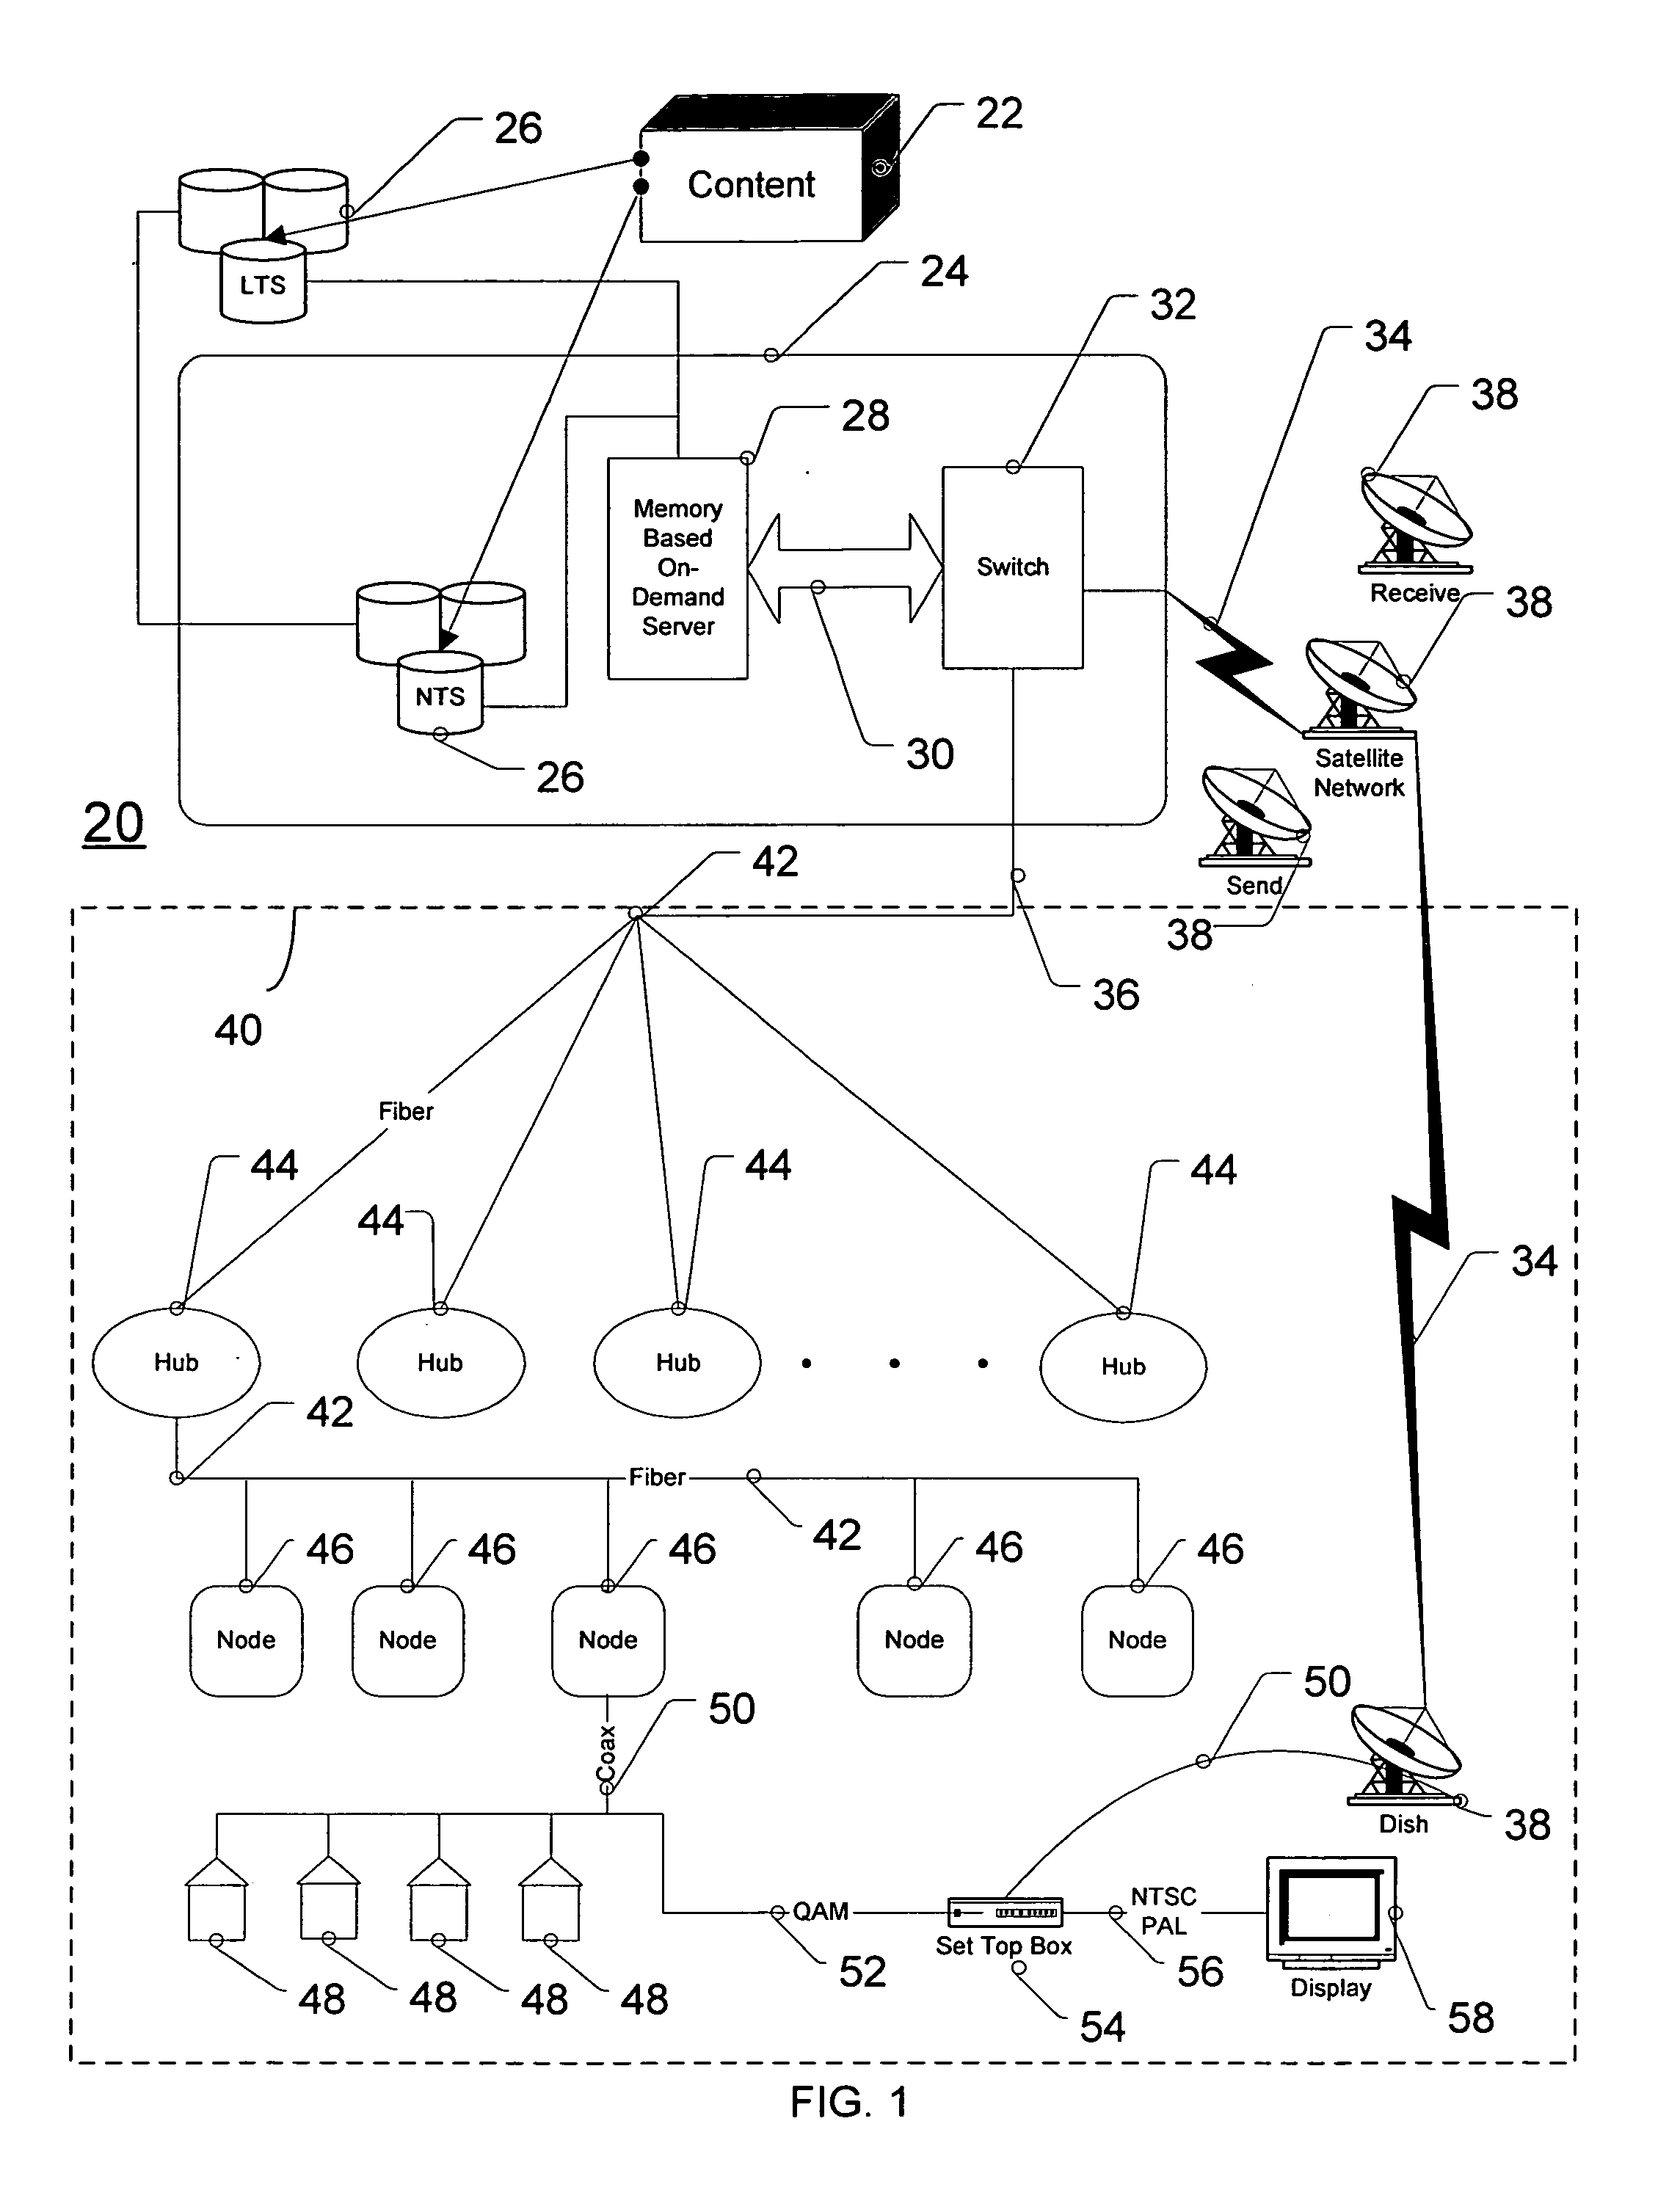 Method and system for controlling streaming in an on-demand server